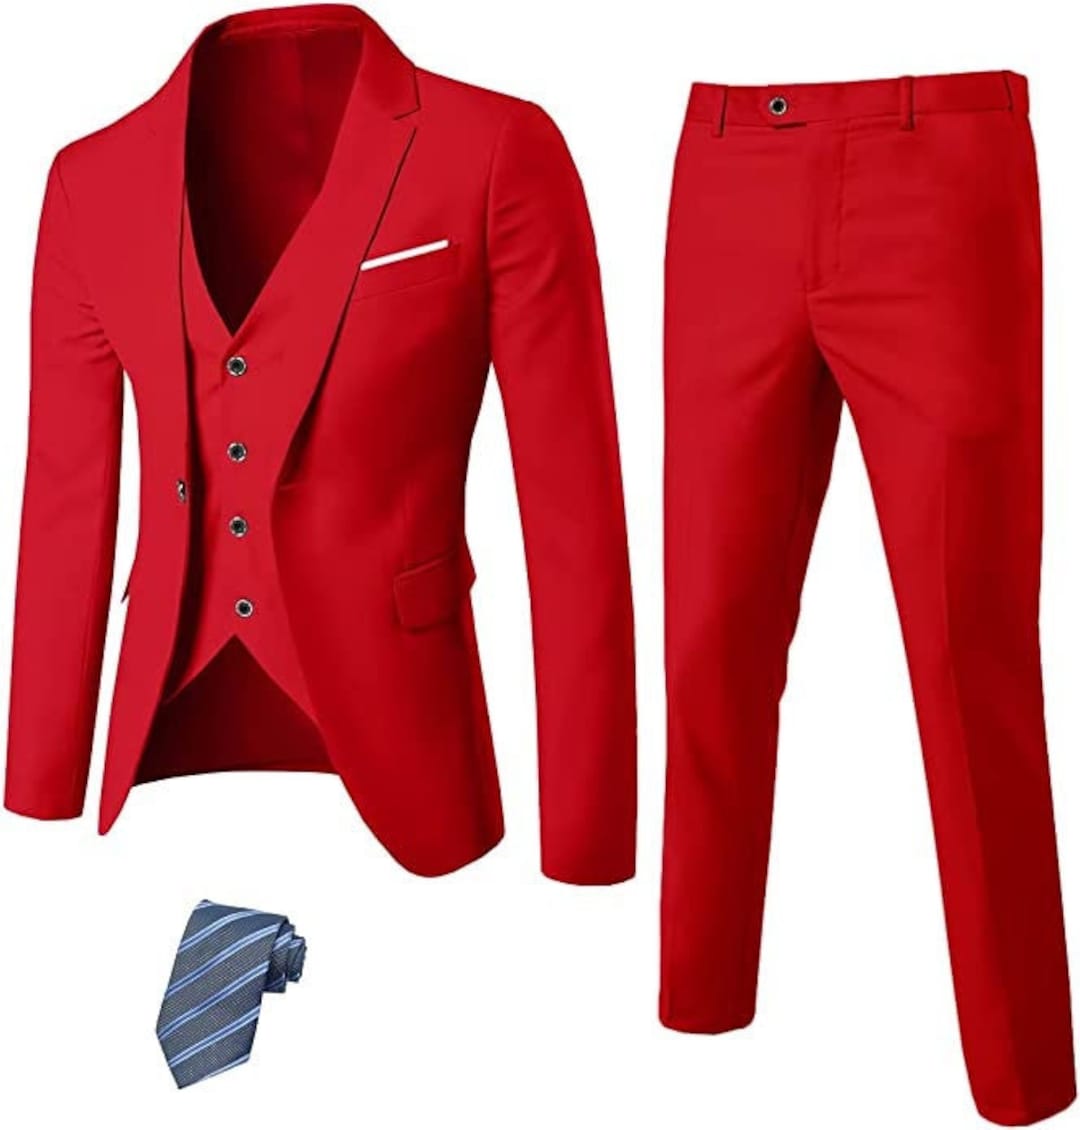 Suit for Man Imported Fabric Premium Dinner Two Piece Party - Etsy